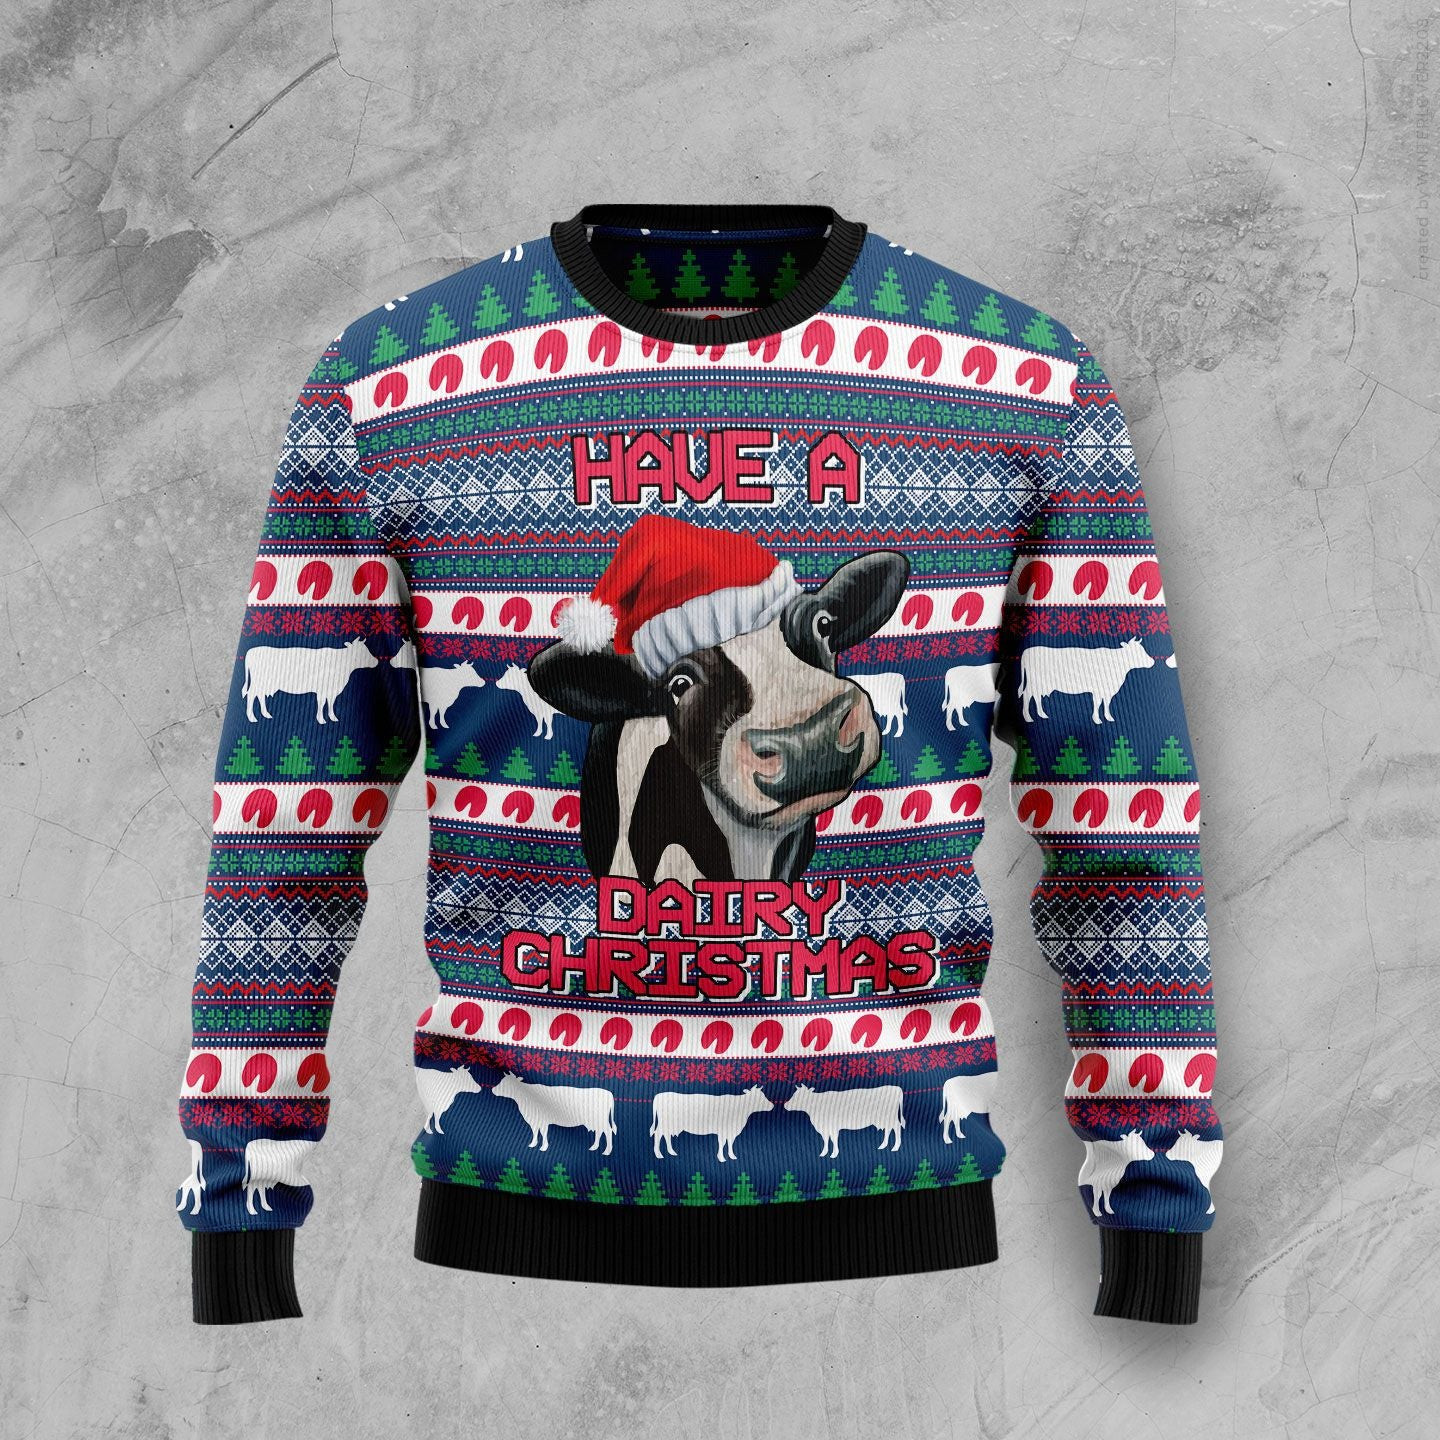 Cow Dairy Christmas Ugly Christmas Sweater, Ugly Sweater For Men Women, Holiday Sweater